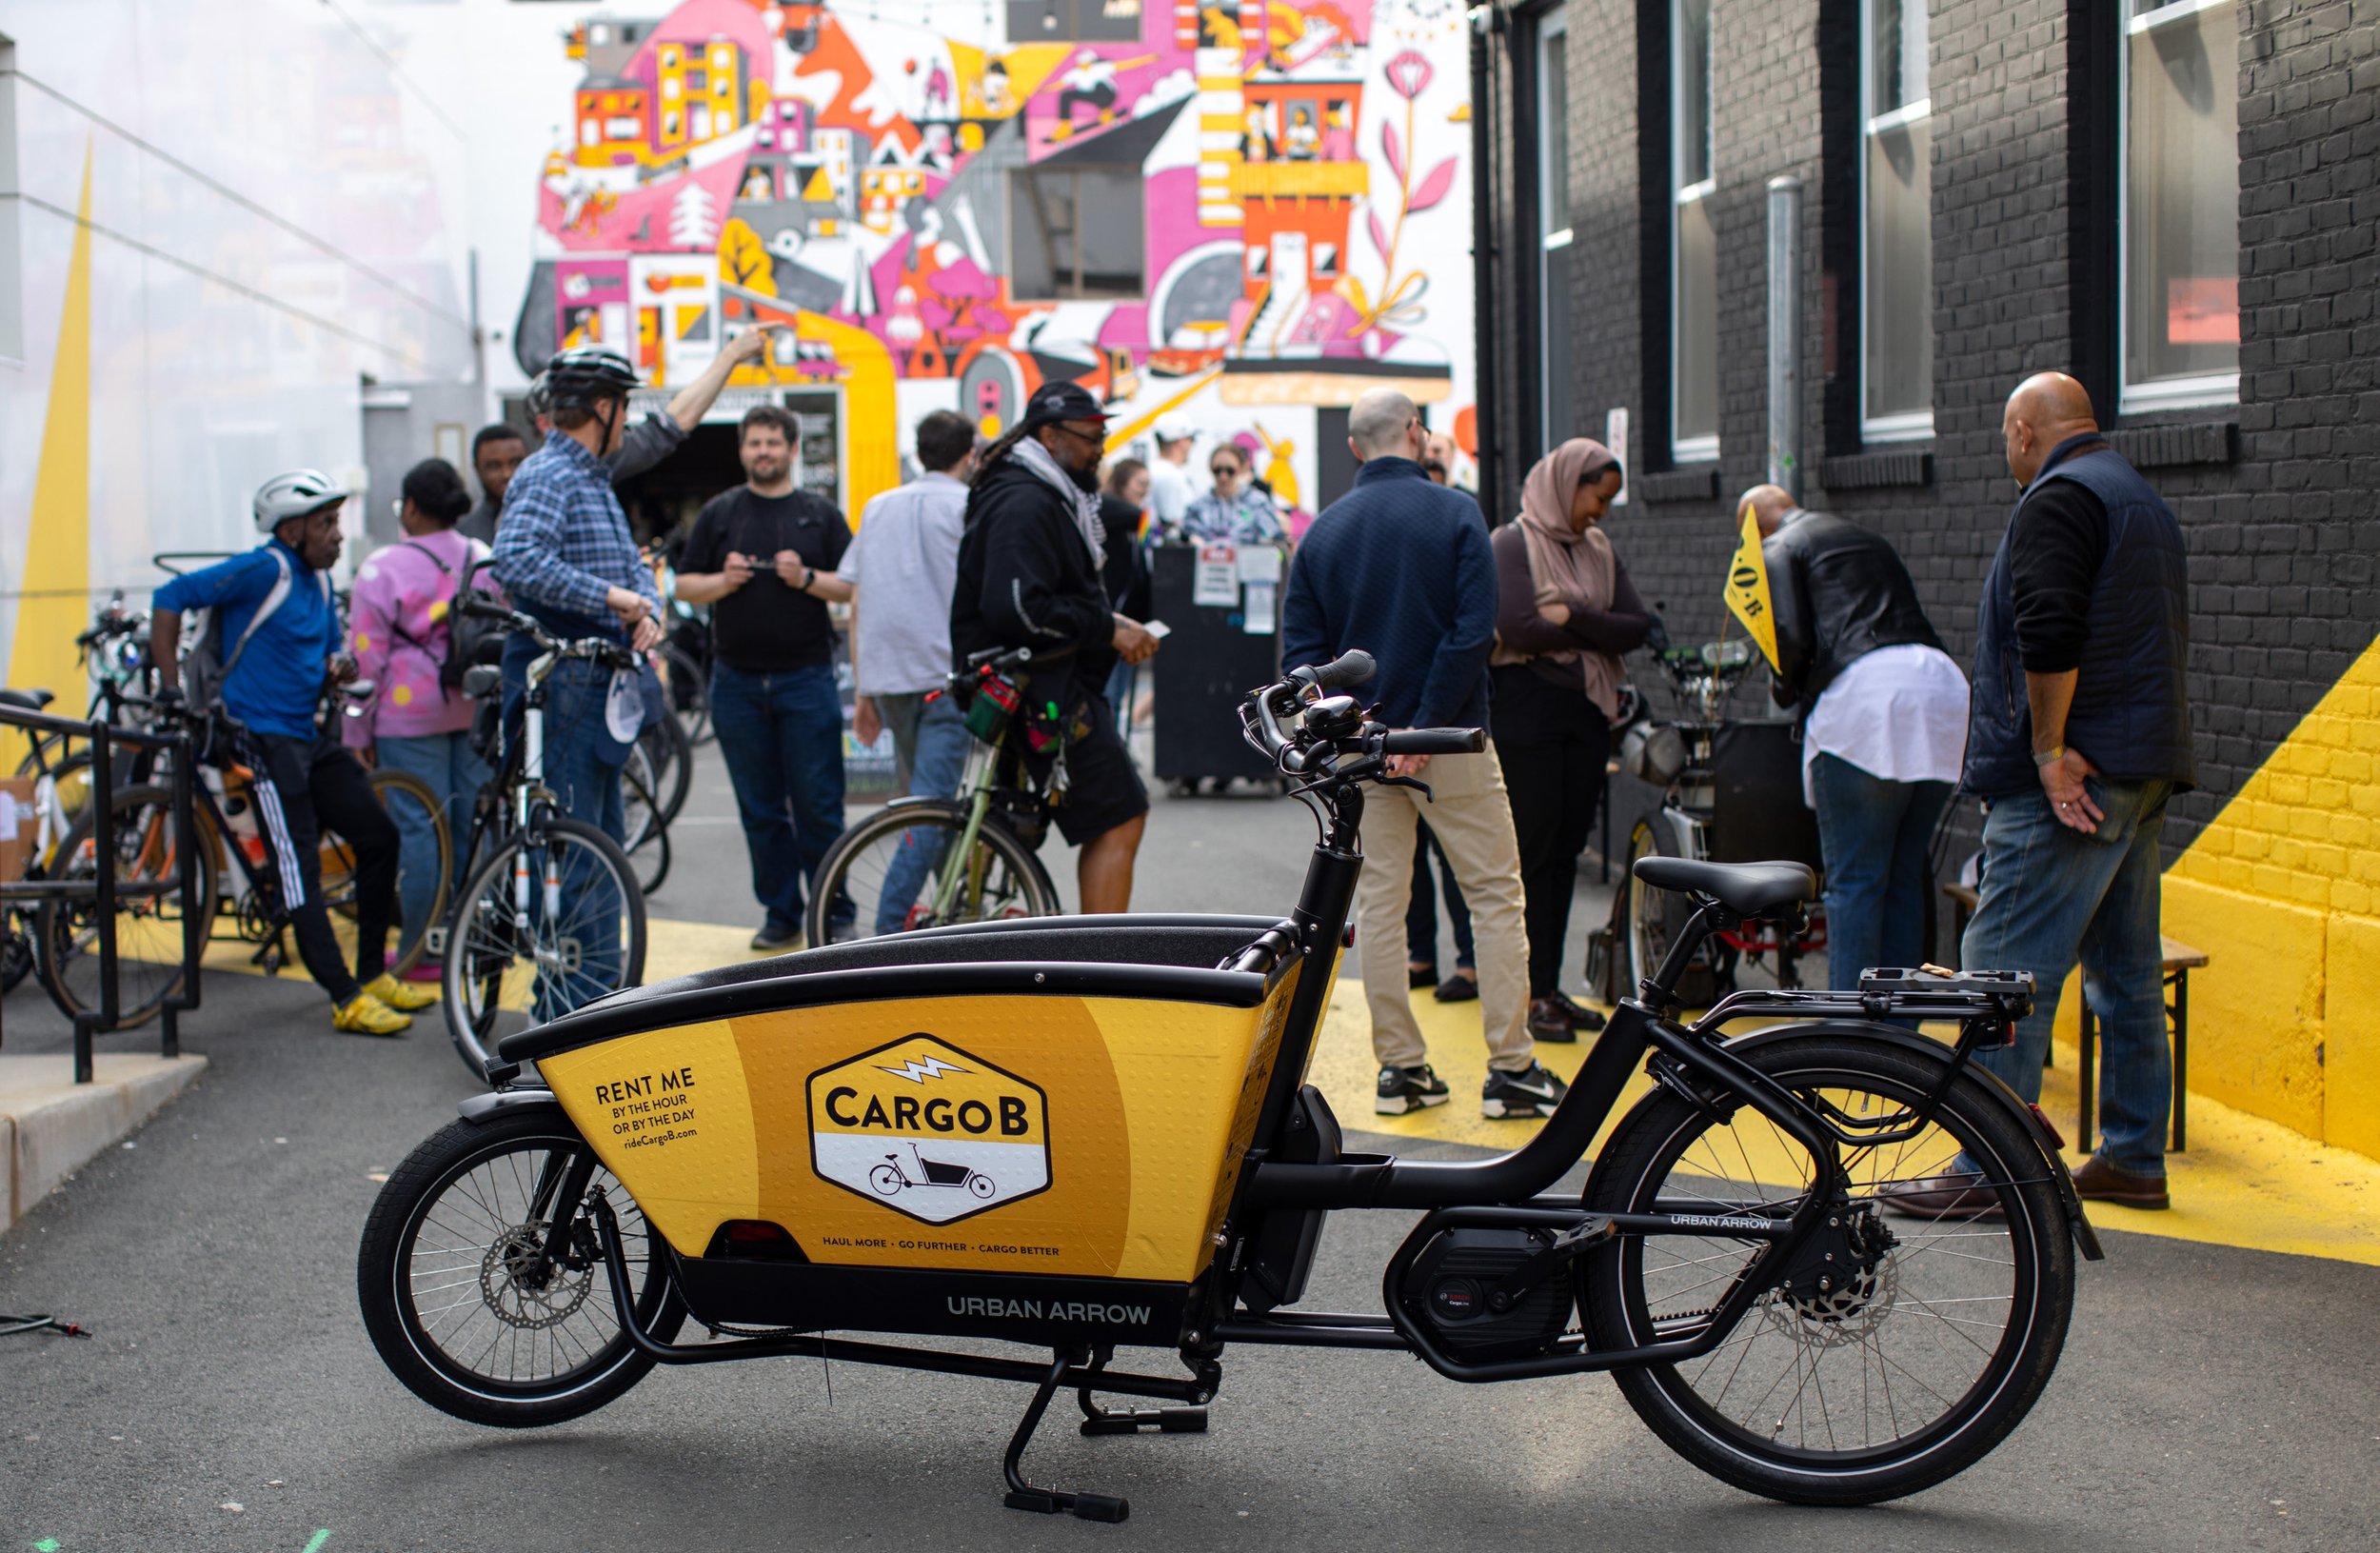 A CargoB cargo bike with a bright yellow bucket in front of the handlebars in the alley outside Aeronaut brewery with a brightly colored mural in the background